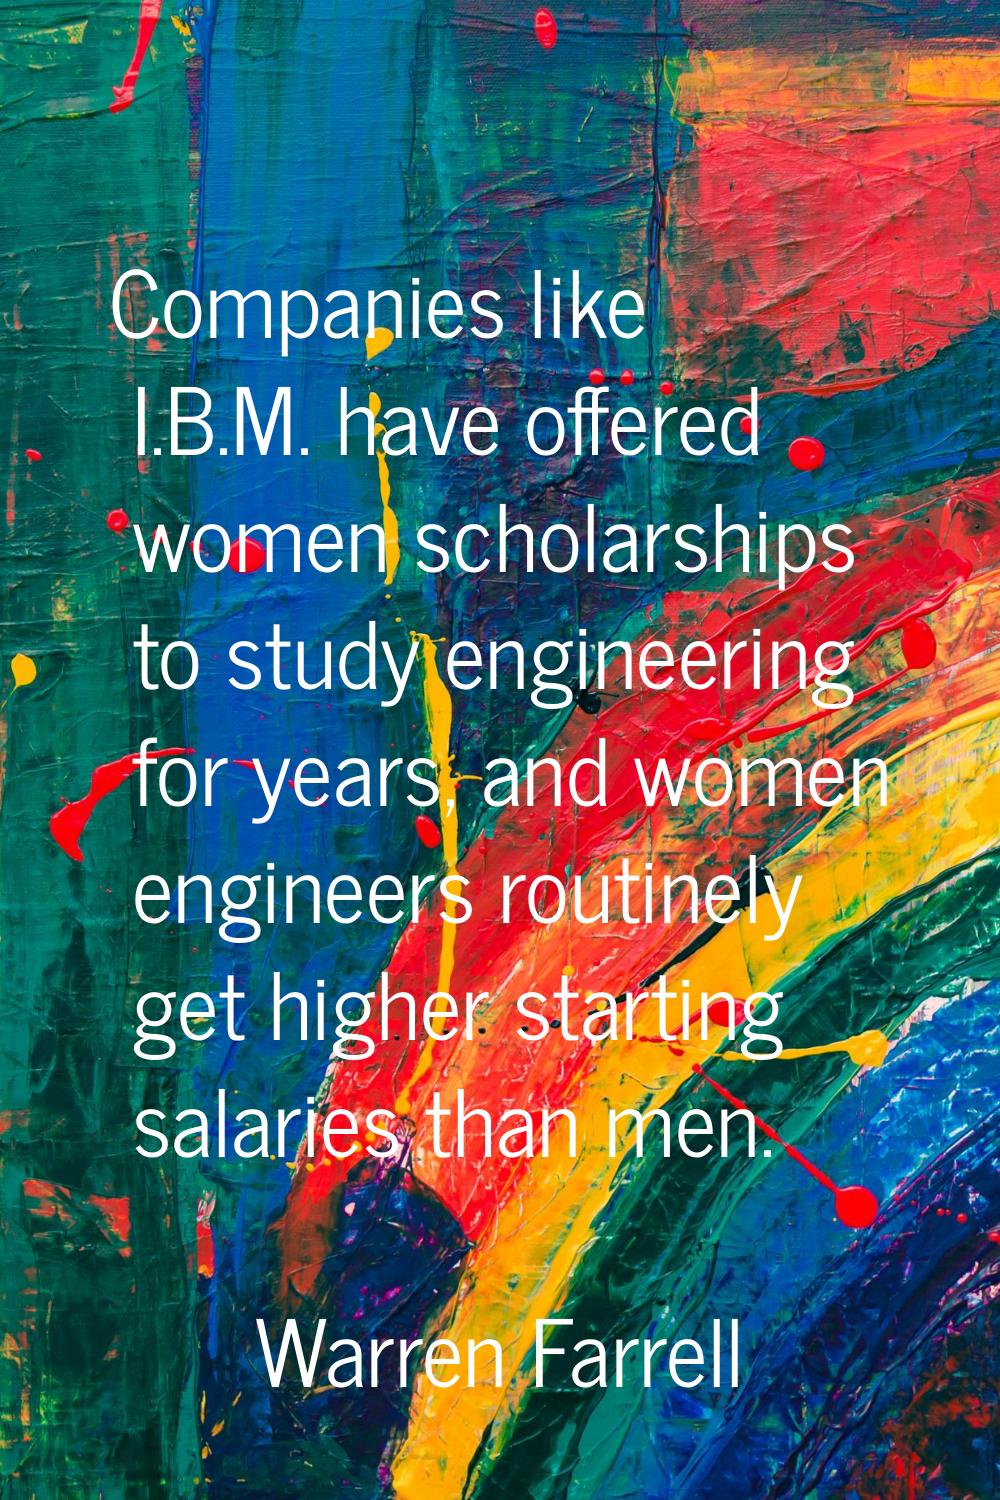 Companies like I.B.M. have offered women scholarships to study engineering for years, and women eng